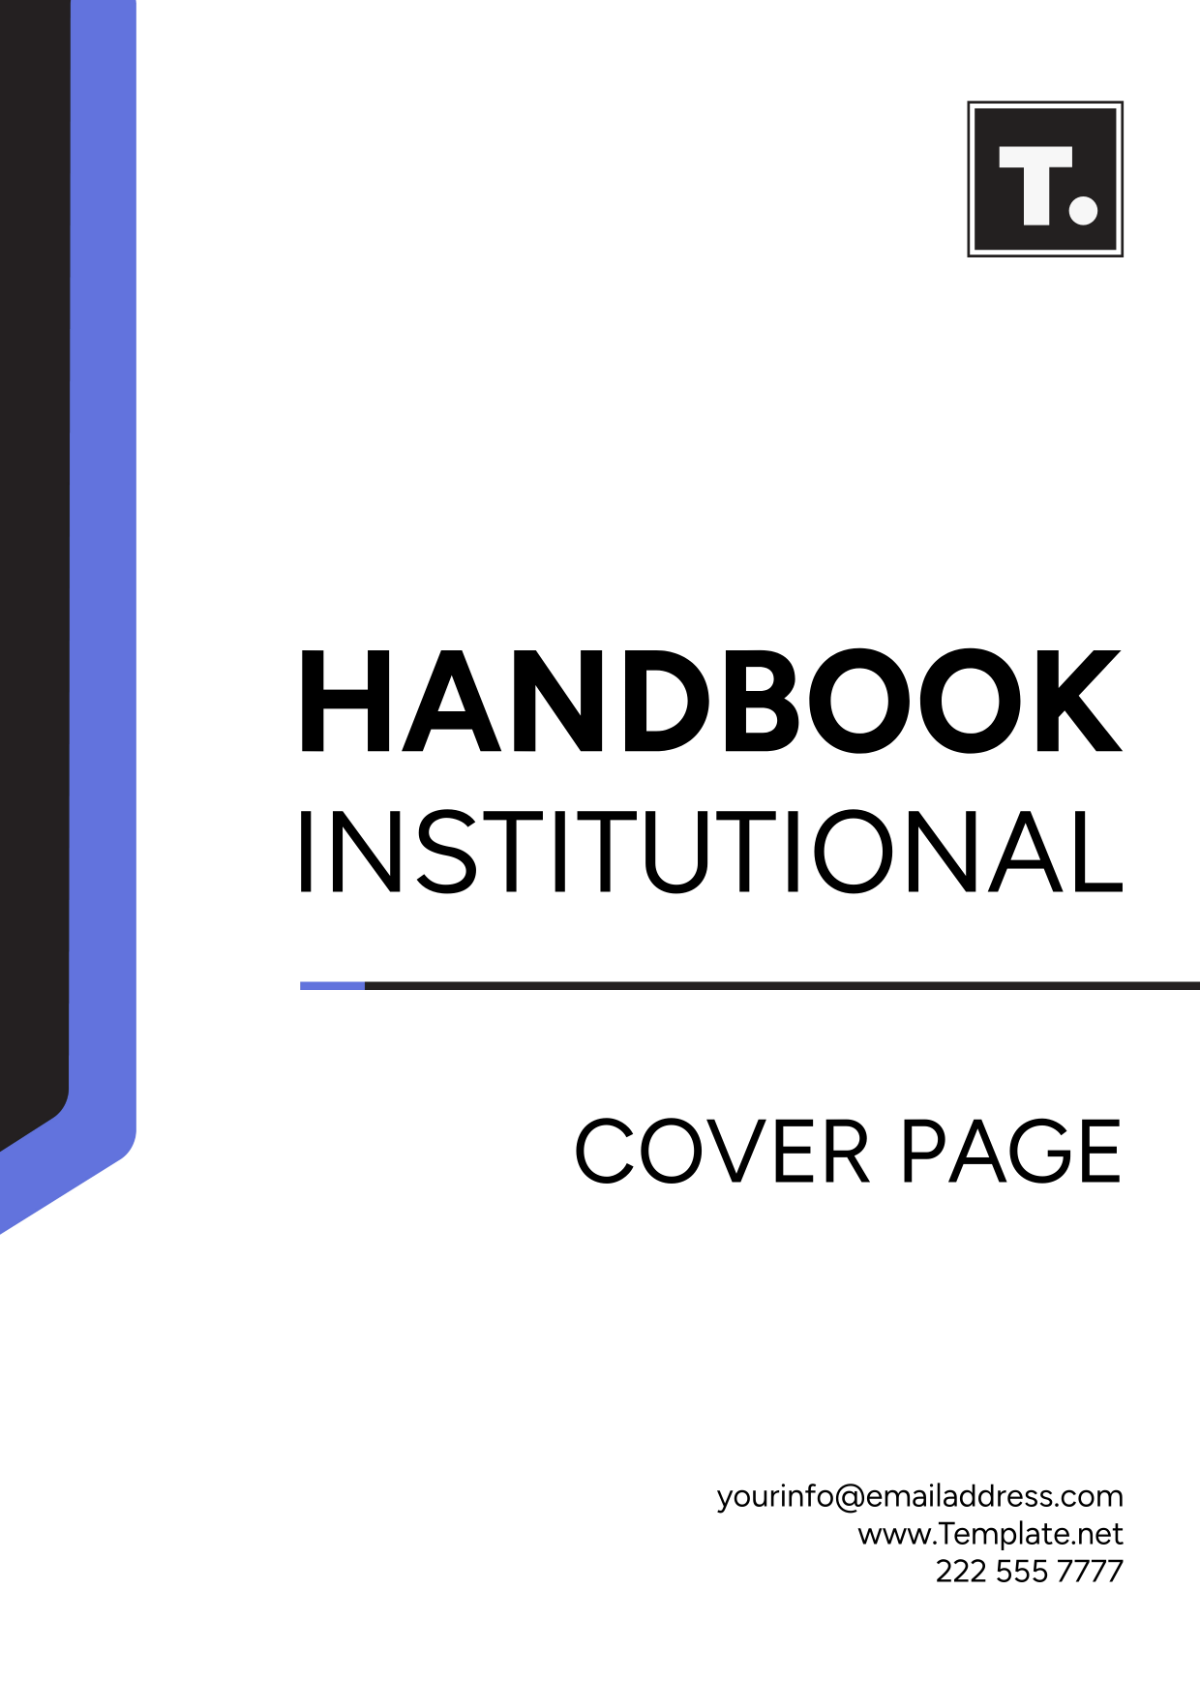 Handbook Institutional Cover Page